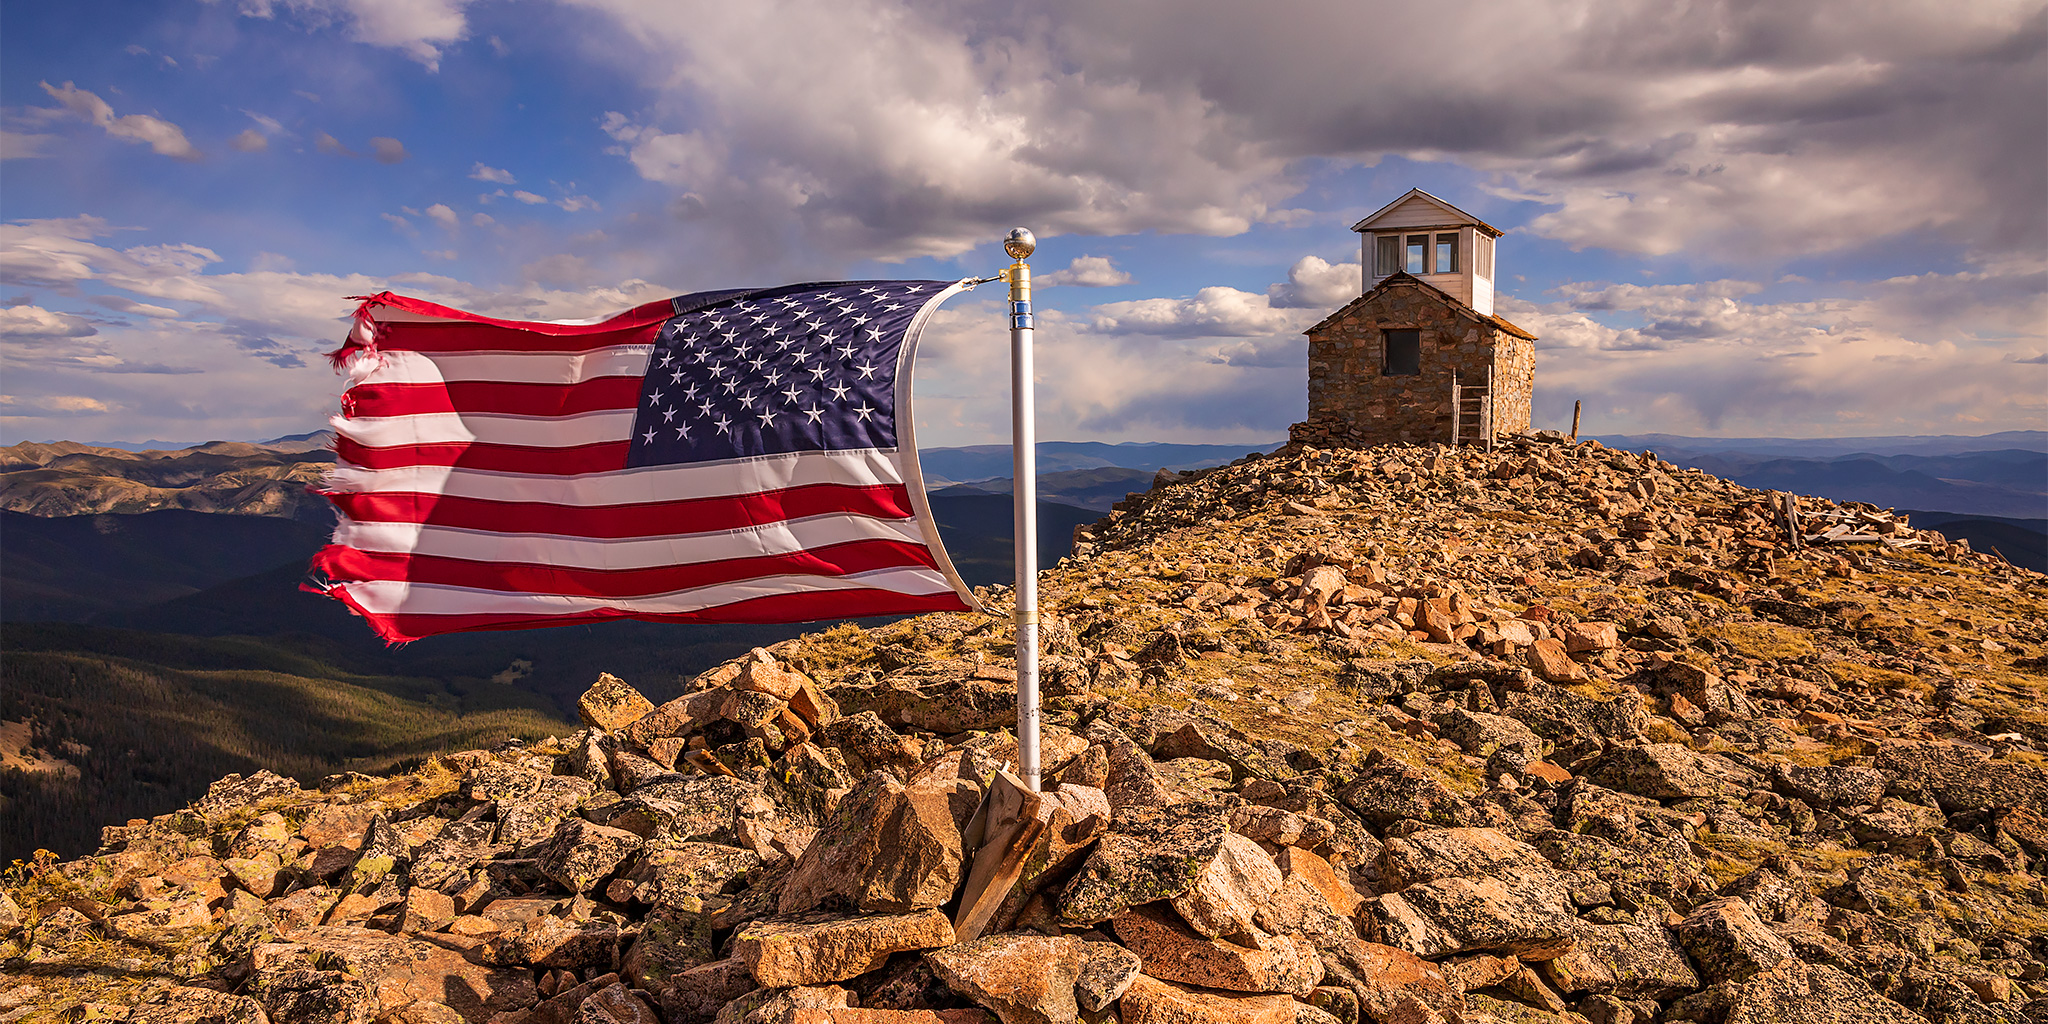 Fairview Peak Fire Lookout: Highest in North America